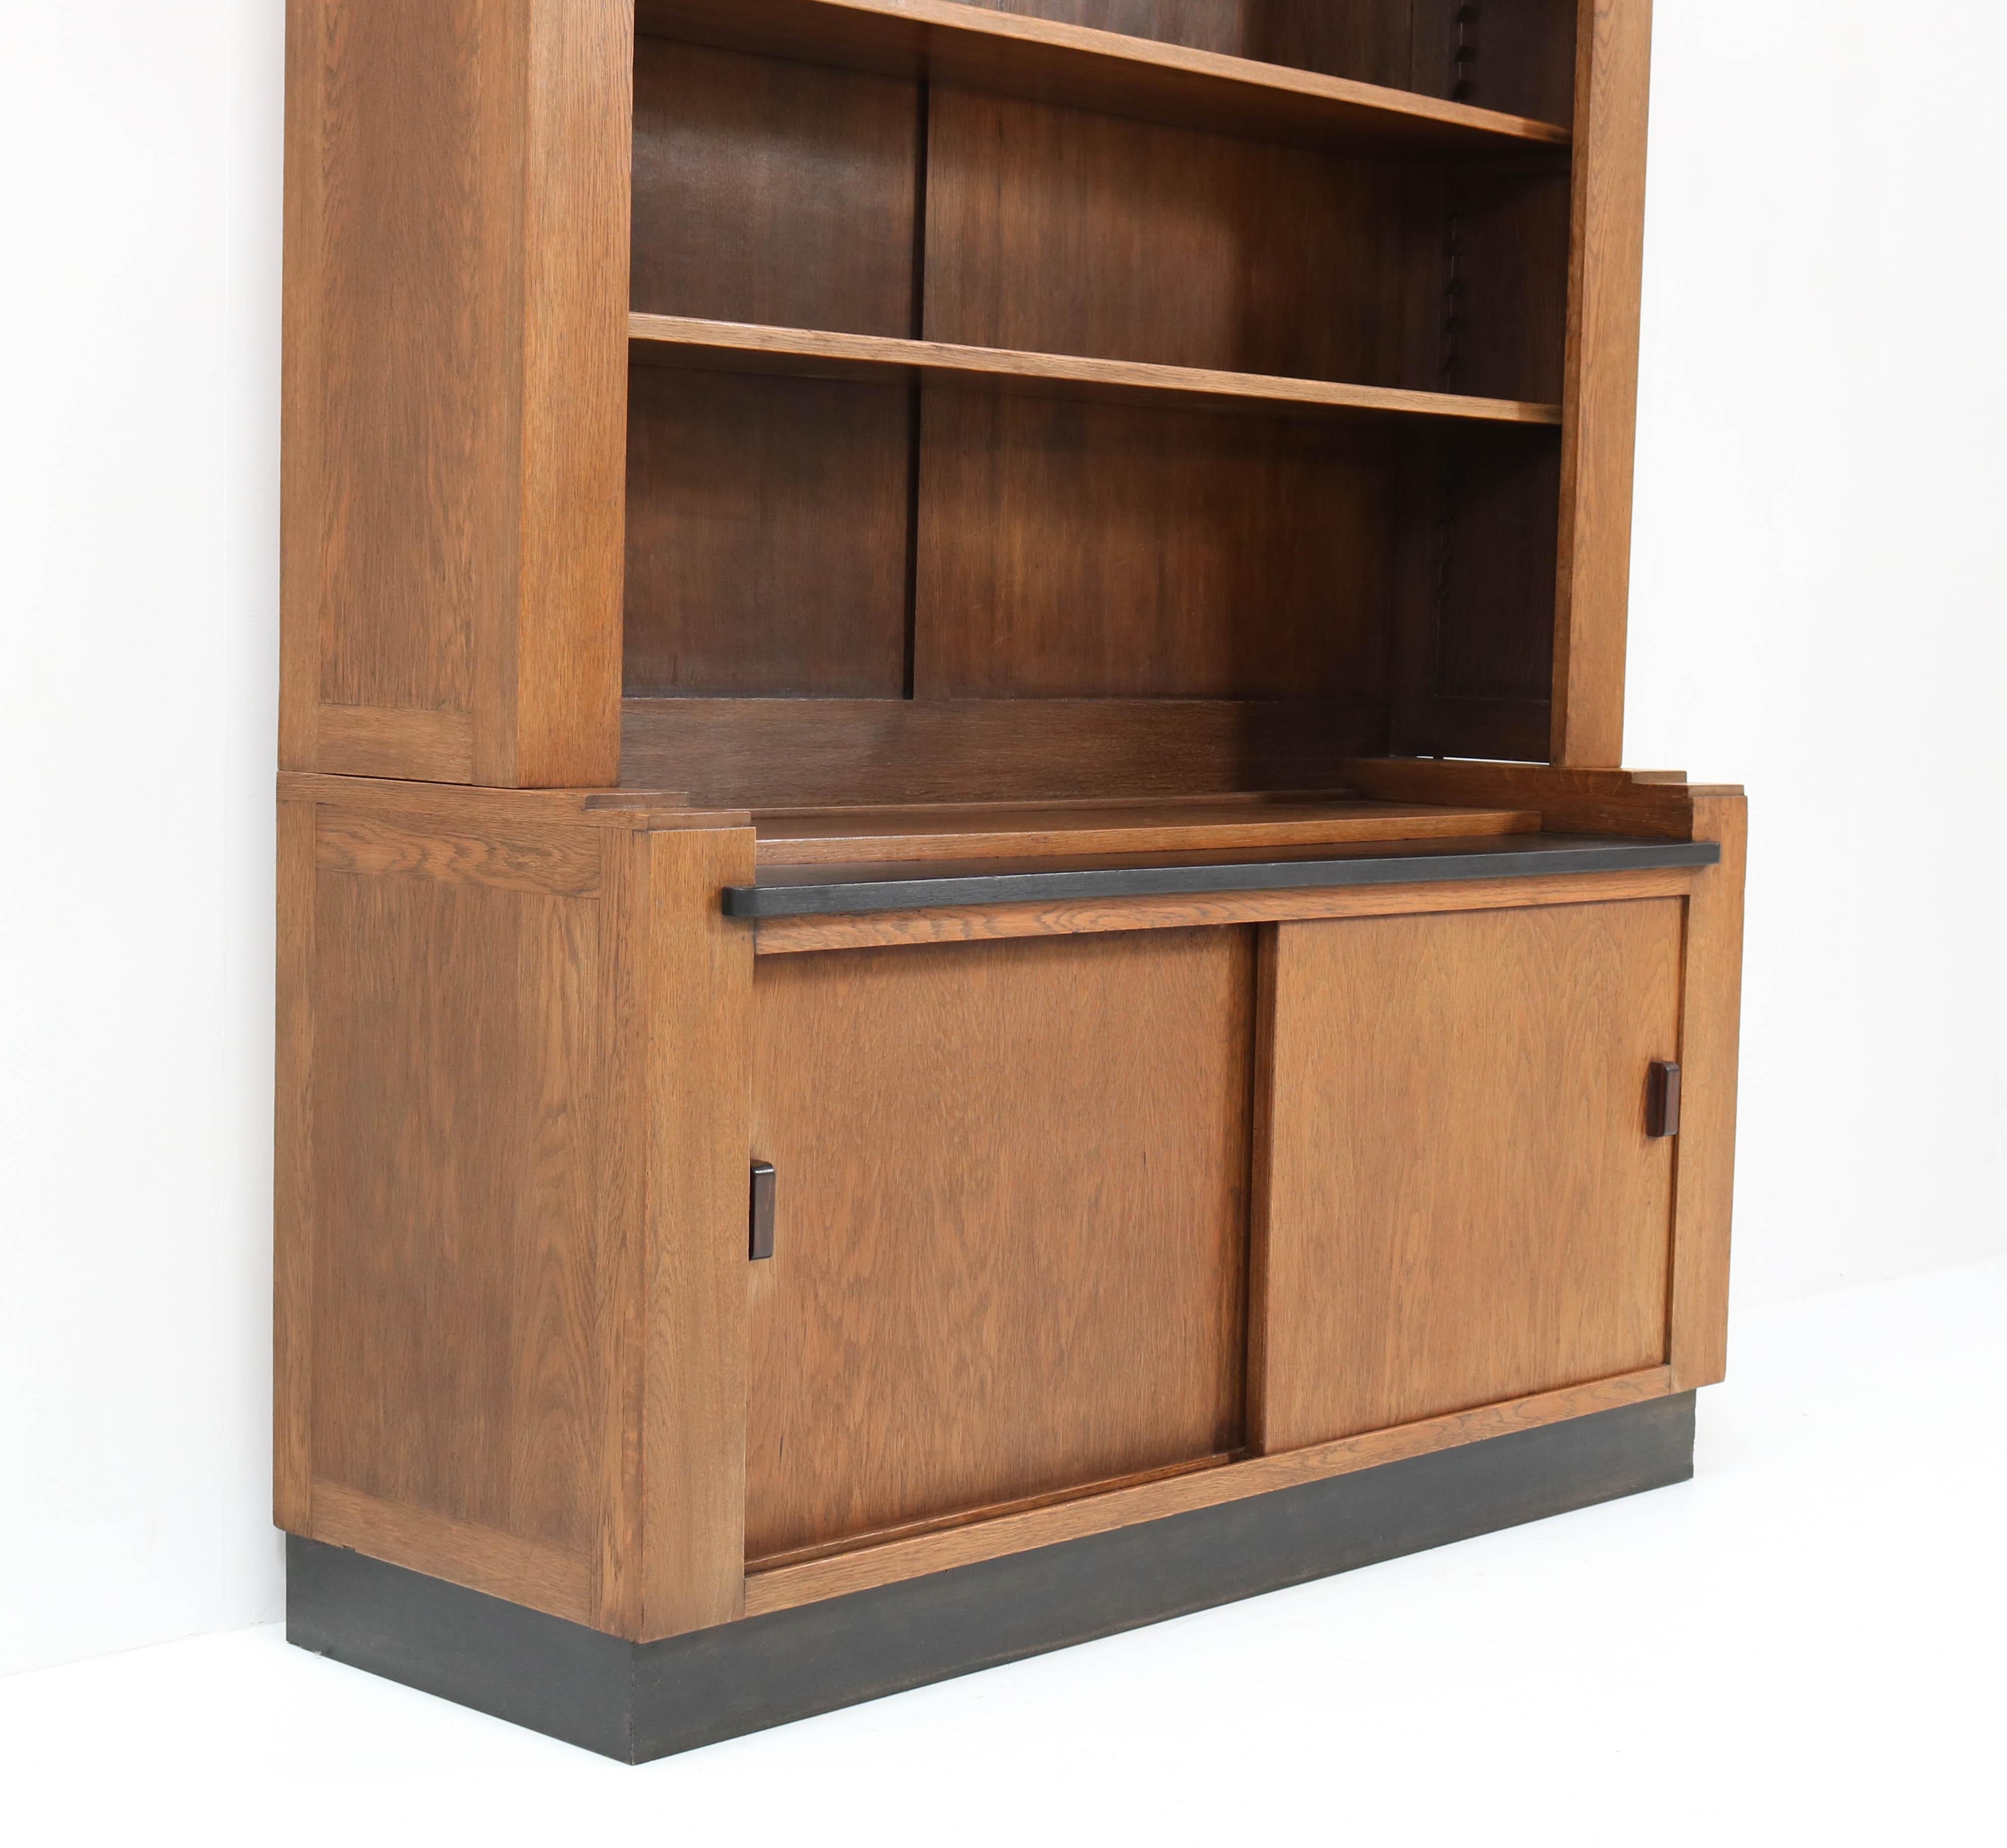 Macassar Oak Art Deco Haagse School Bookcase by Cor Alons for L.O.V. Oosterbeek, 1920s